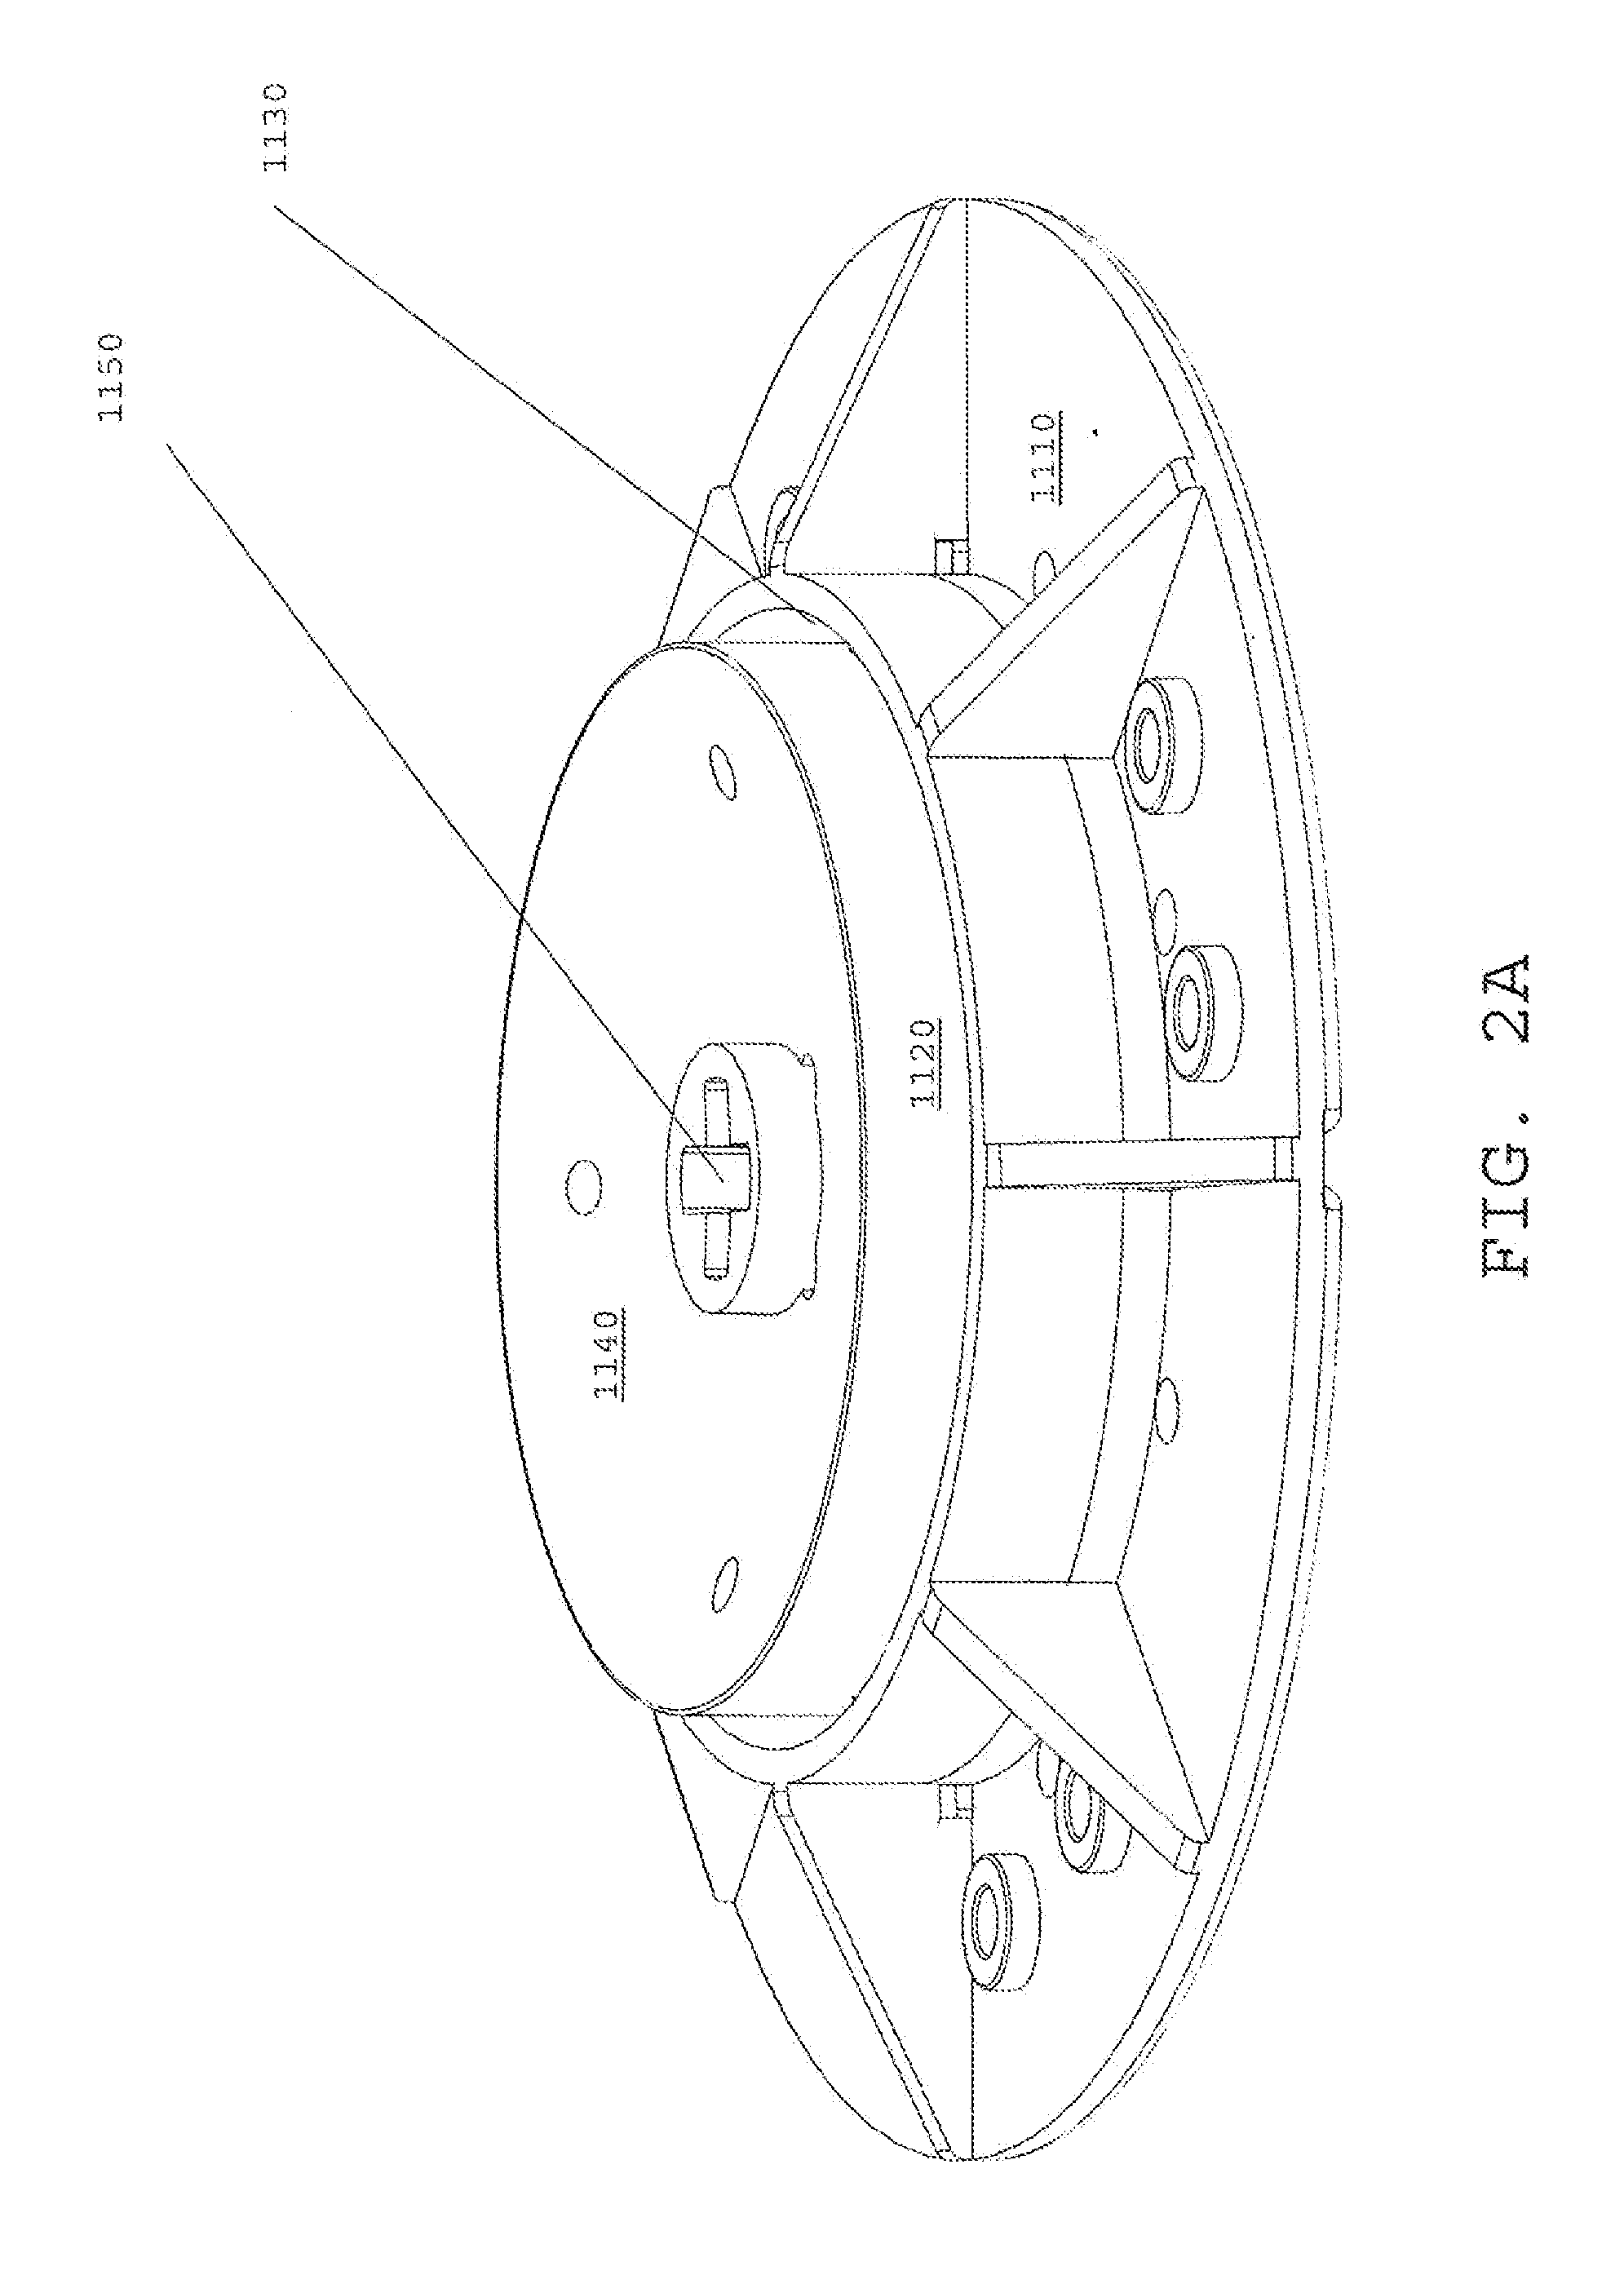 Apparatus for Establishing a Paver Surface Over a Subsurface